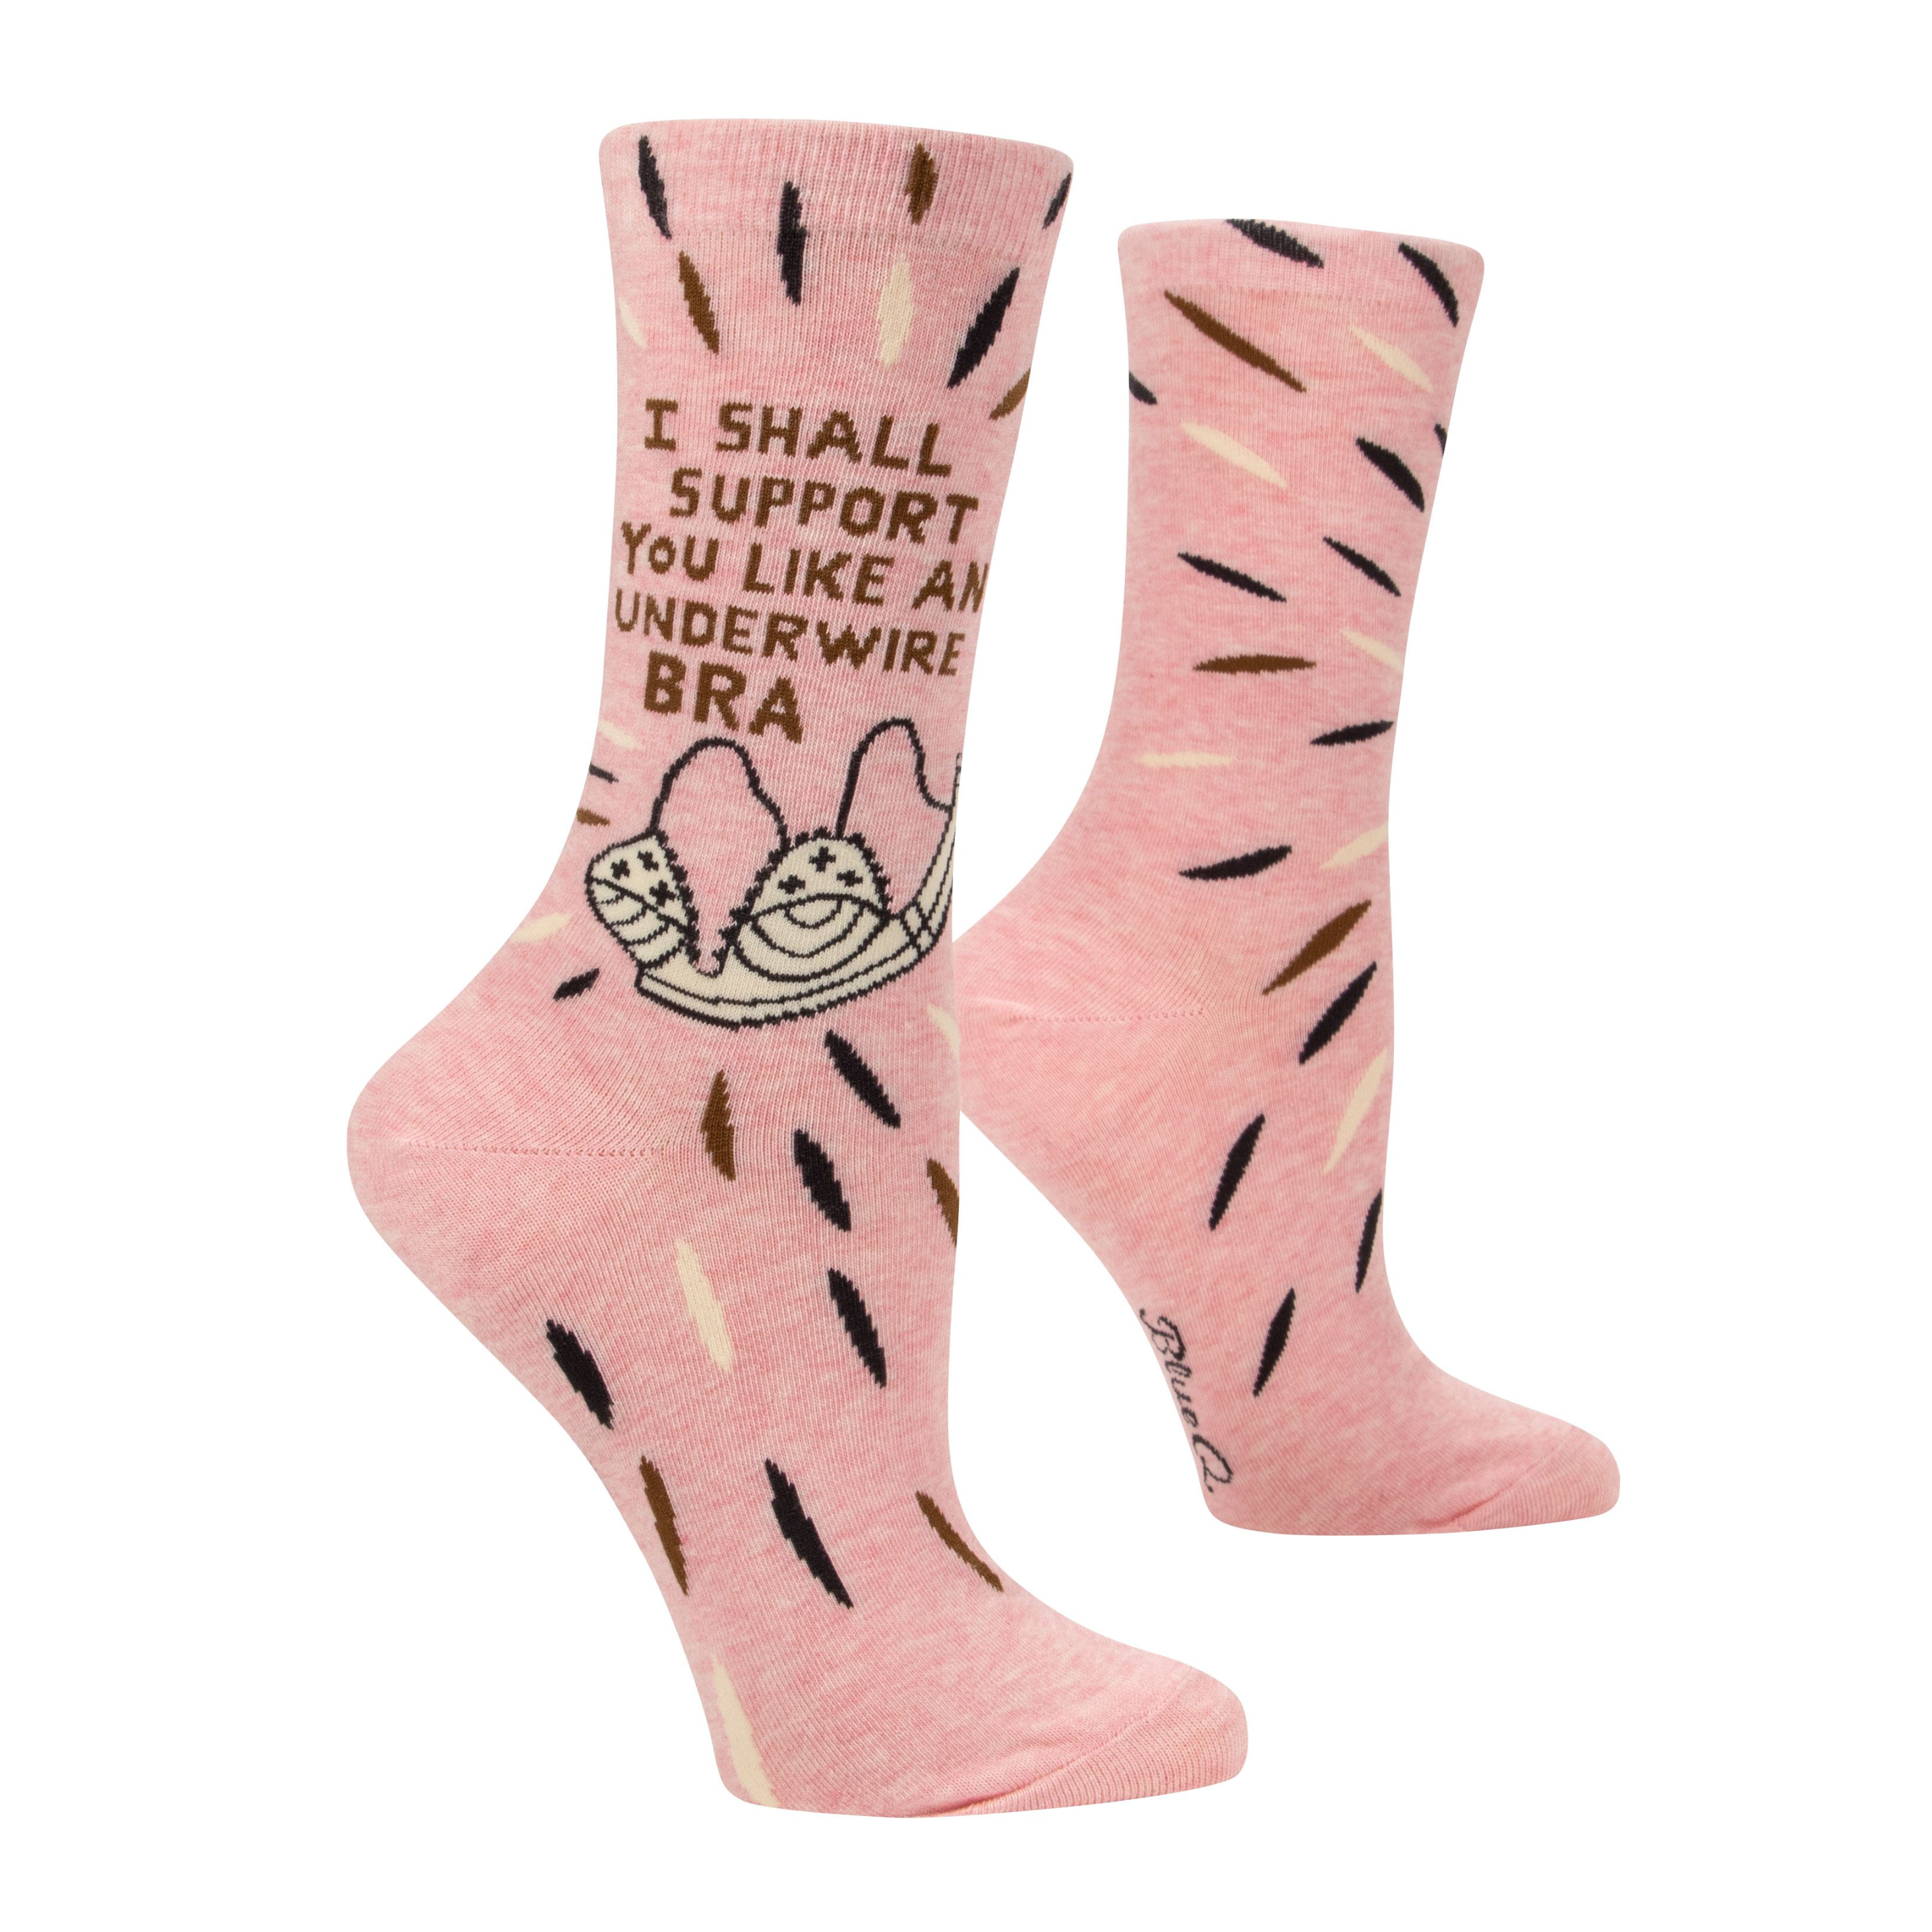 pink socks with brown black and white lines shows a picture of a white bra with brown words above that say i shall support you like an underwire bra